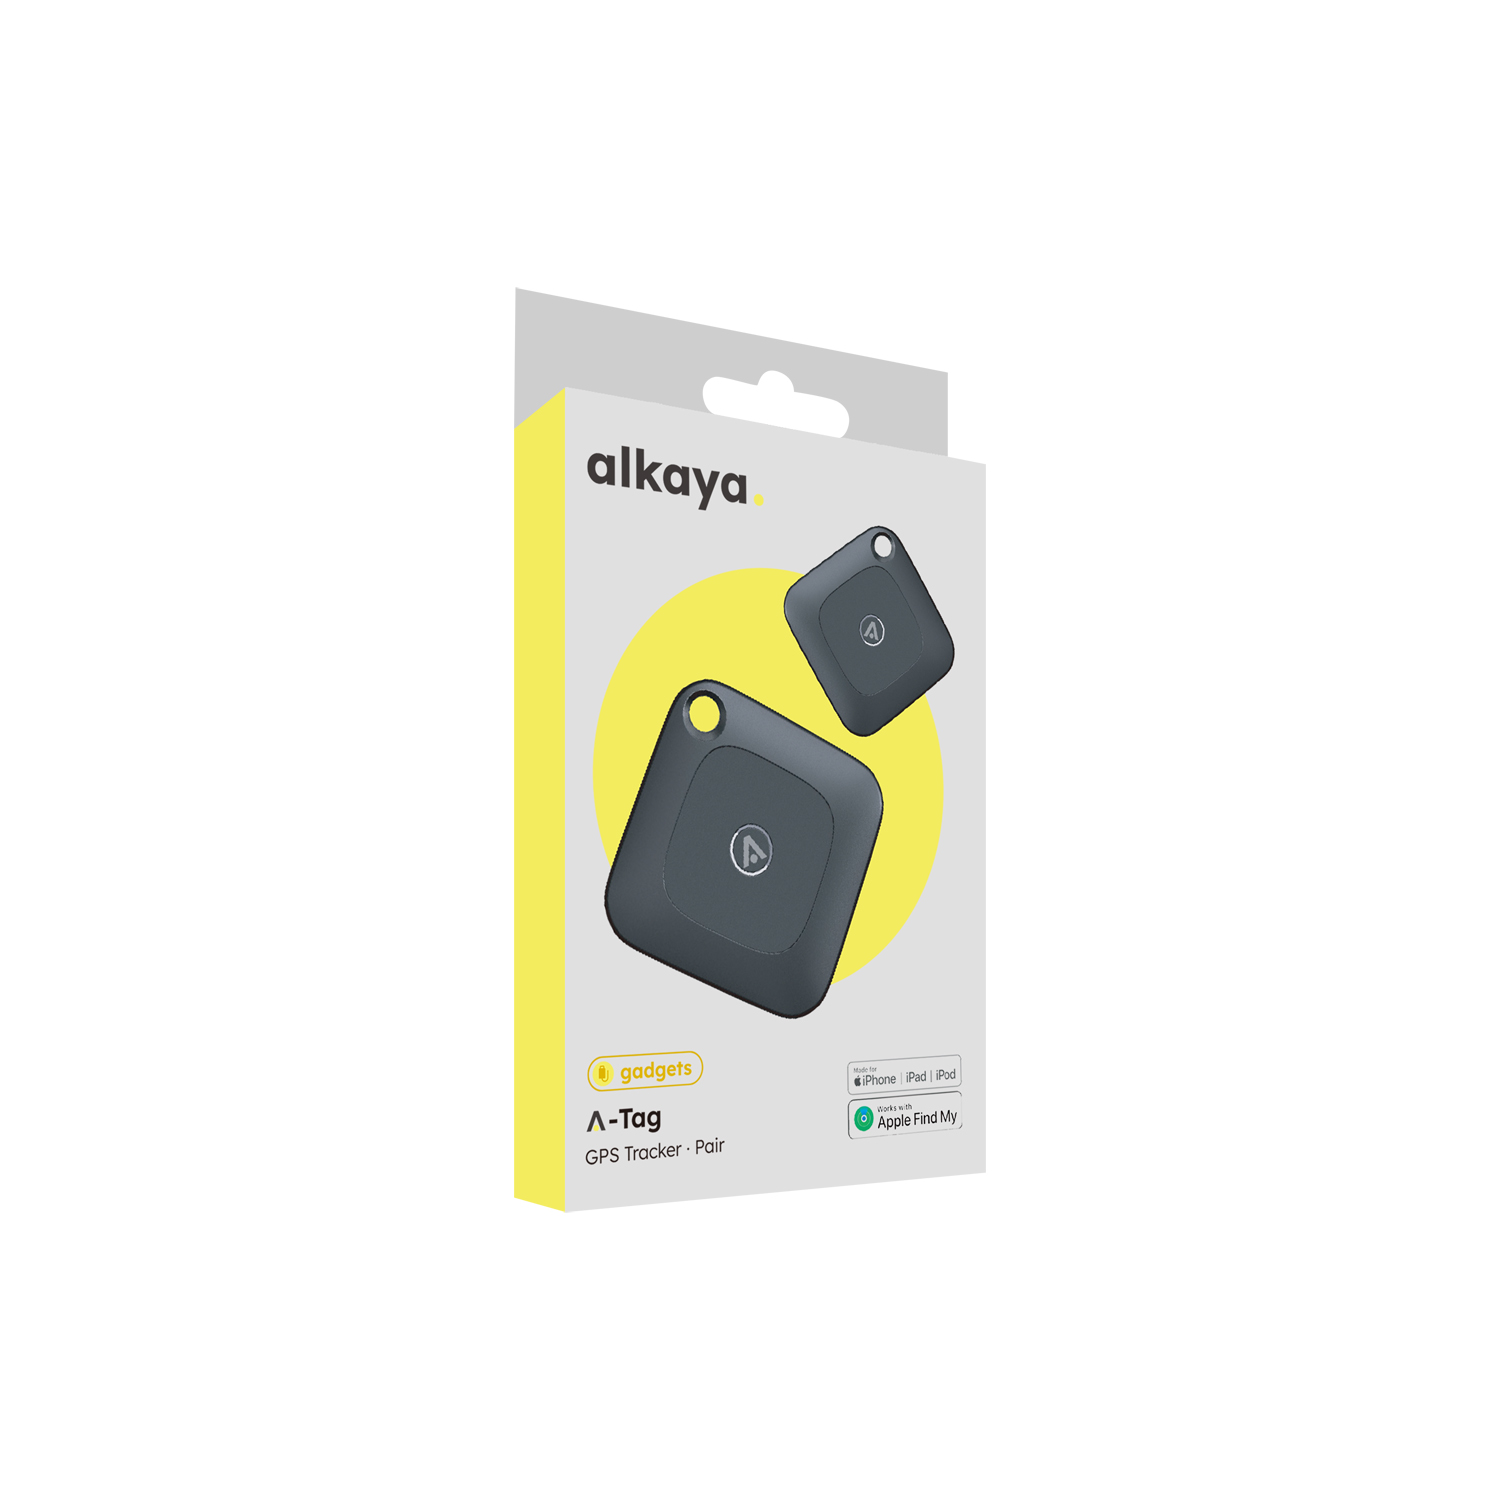 alkaya. | A Tag GPS Tracker Bluetooth Tracker Compatible  for Apple "Find my" | 2 pcs, Black